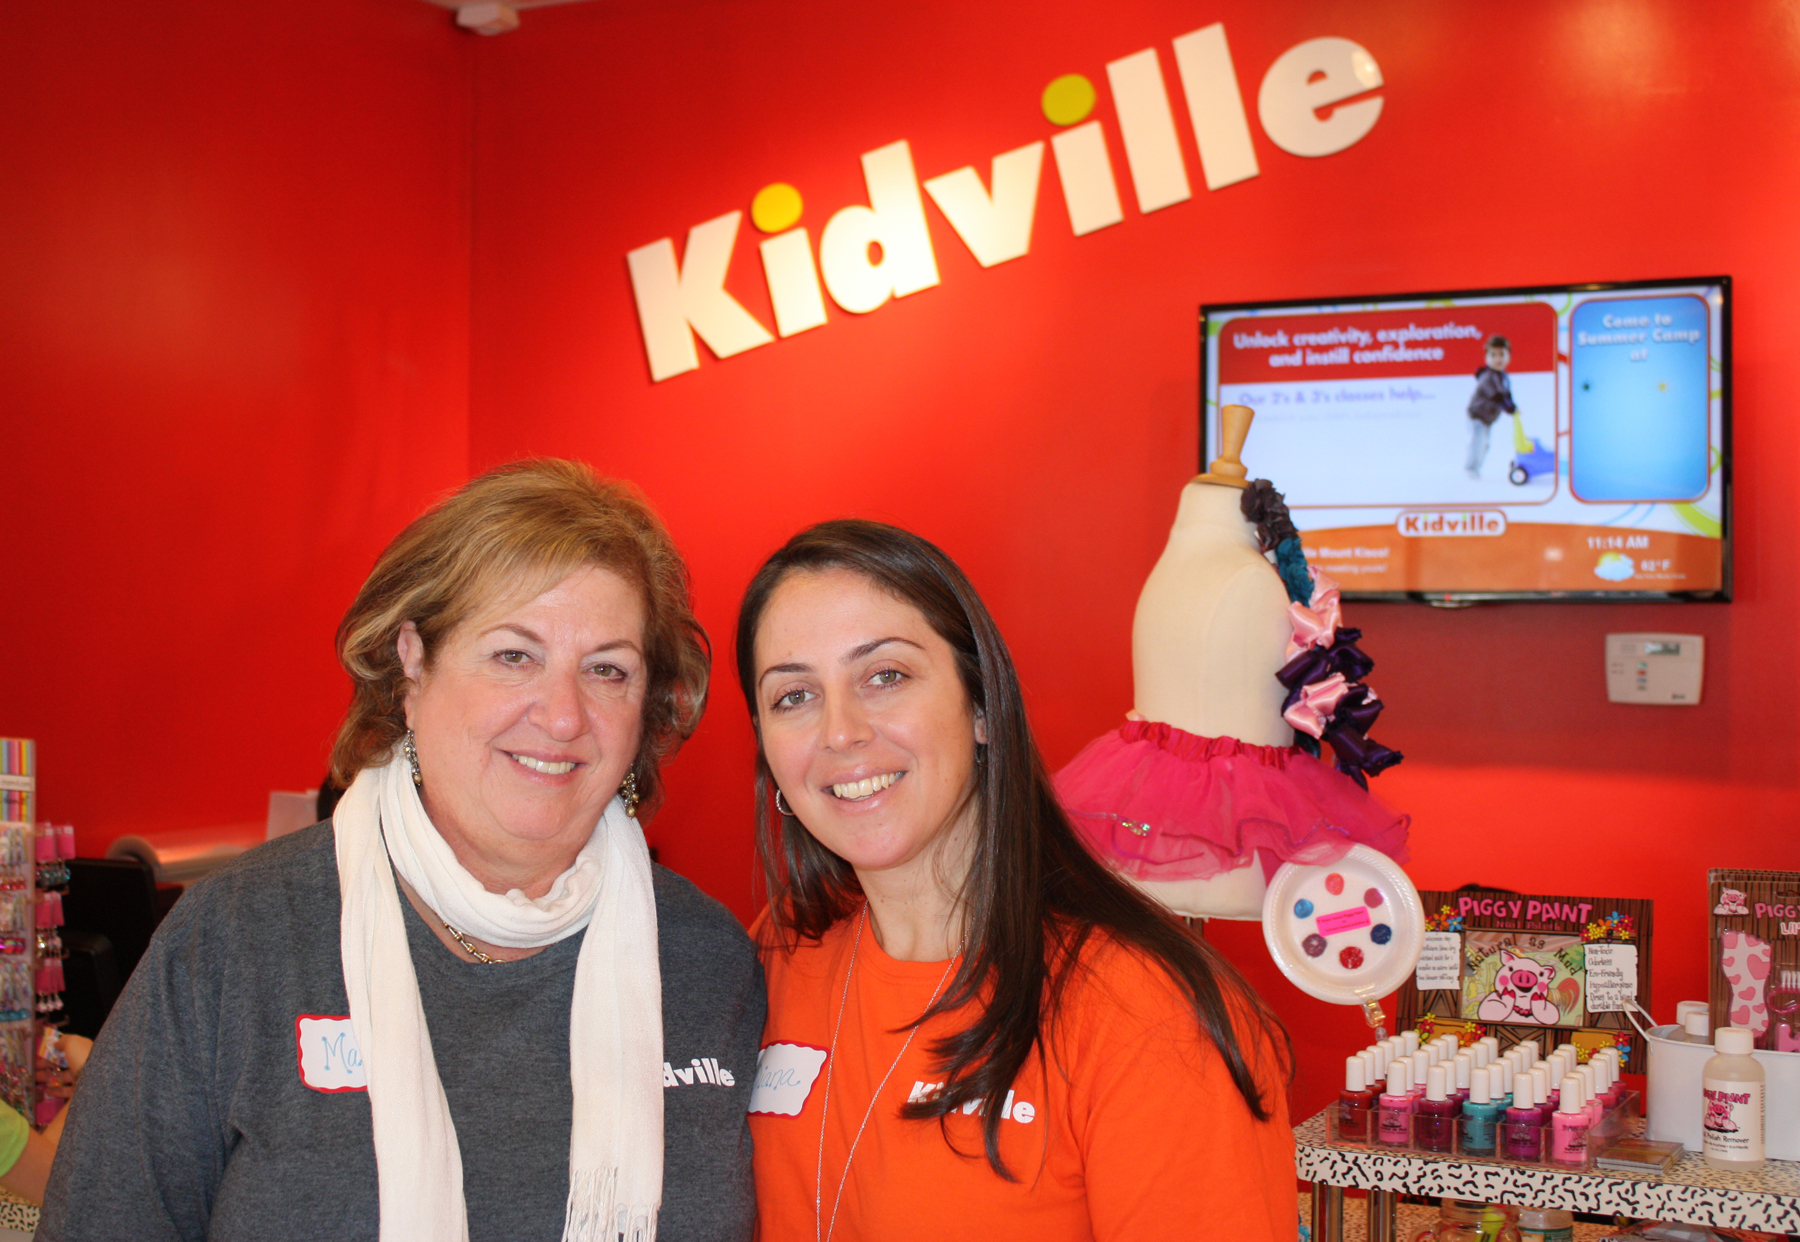 Diana Mann (right), “Mayor” of Kidville Mount Kisco with her mom Marcia Schenker (left) at Kidville’s Grand Opening. Marcia is the Early Childhood Development Manager of Kidville Mount Kisco.